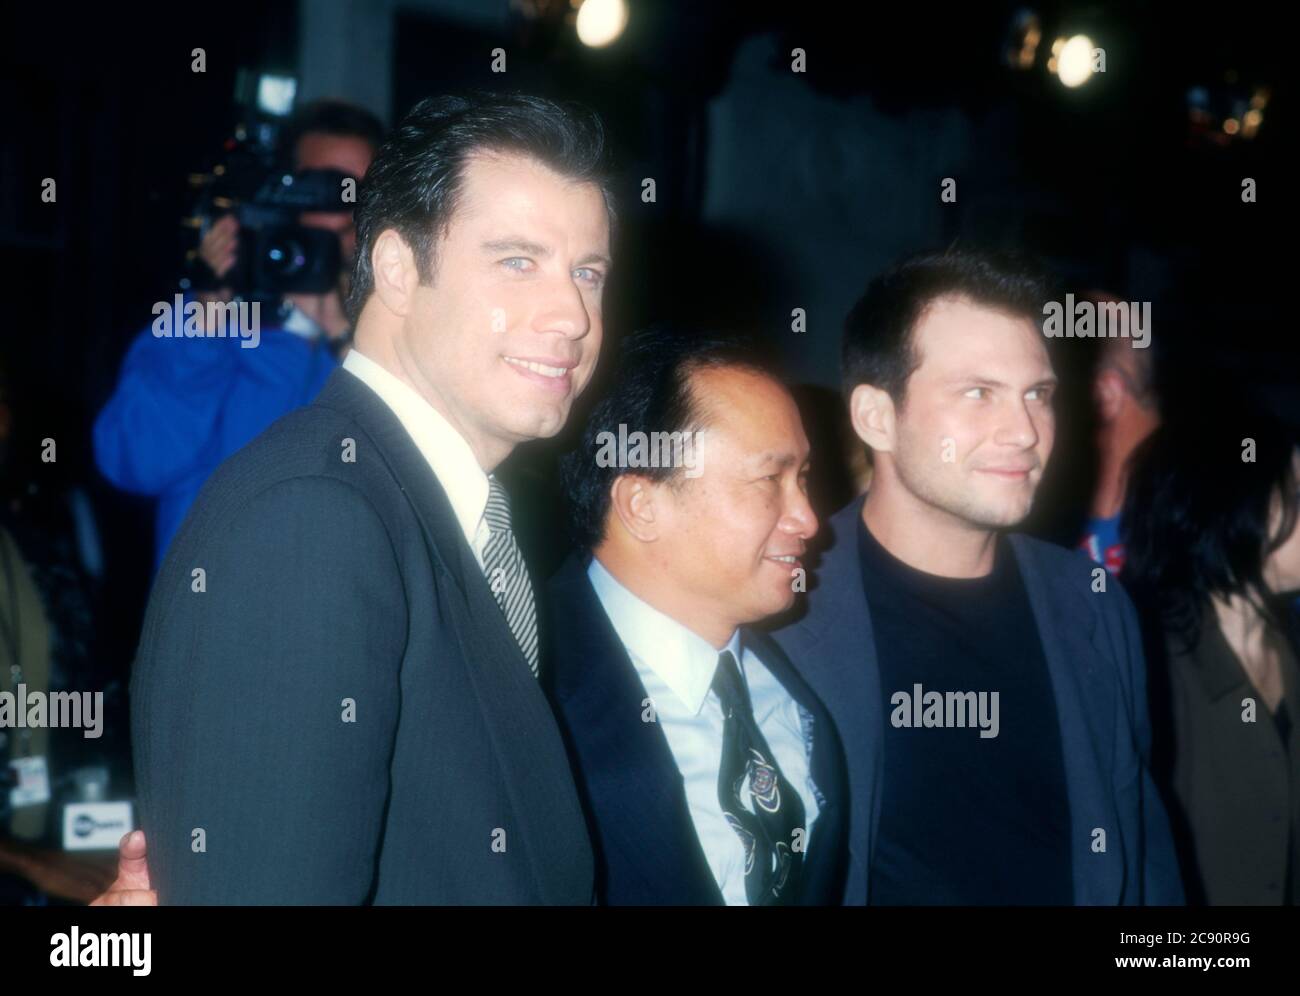 Westwood, California, USA 5th February 1996 Actor John Travolta, director John Woo and actor Christian Slater attend 20th Century Fox' 'Broken Arrow' Premiere on February 5, 1996 at Mann Village Theatre in Westwood, California, USA. Photo by Barry King/Alamy Stock Photo Stock Photo